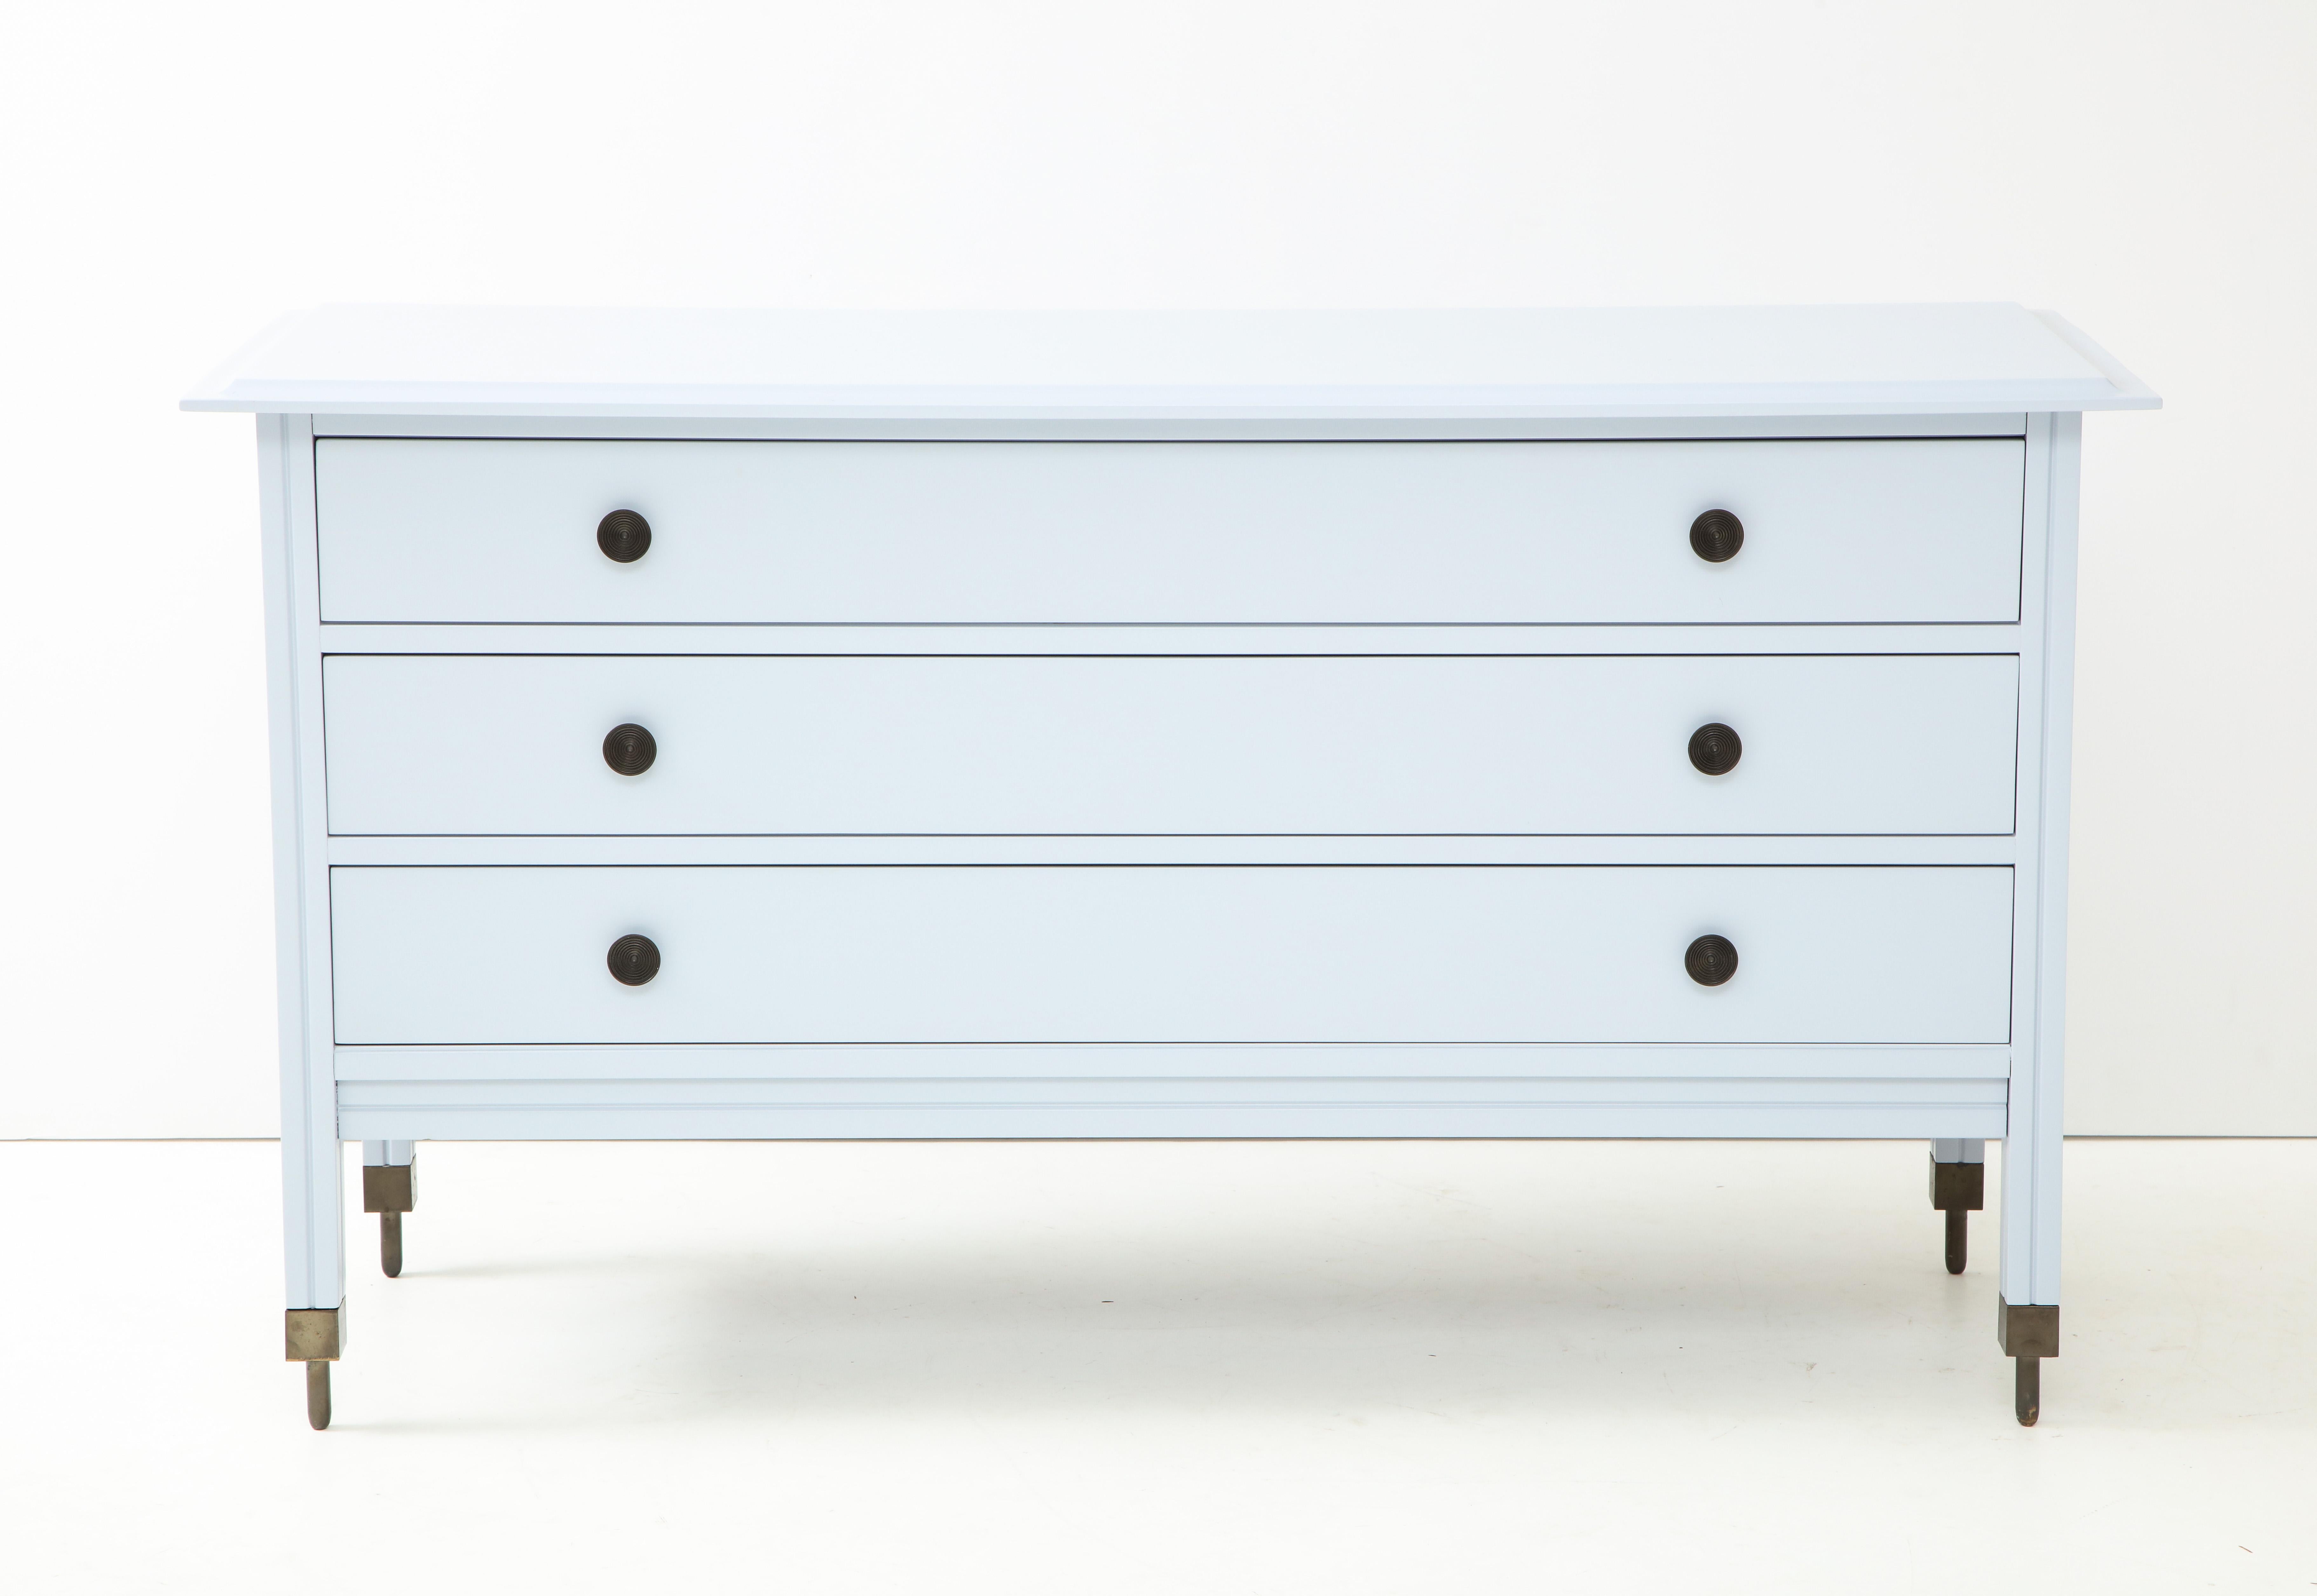 Elegant chest of drawers by acclaimed architect and designer Carlo De Carli, Italy, circa 1963. 

Produced by pioneering furniture manufacturer Sormani, this sleek chest consists of three drawers, original patinated brass pulls, and stunning